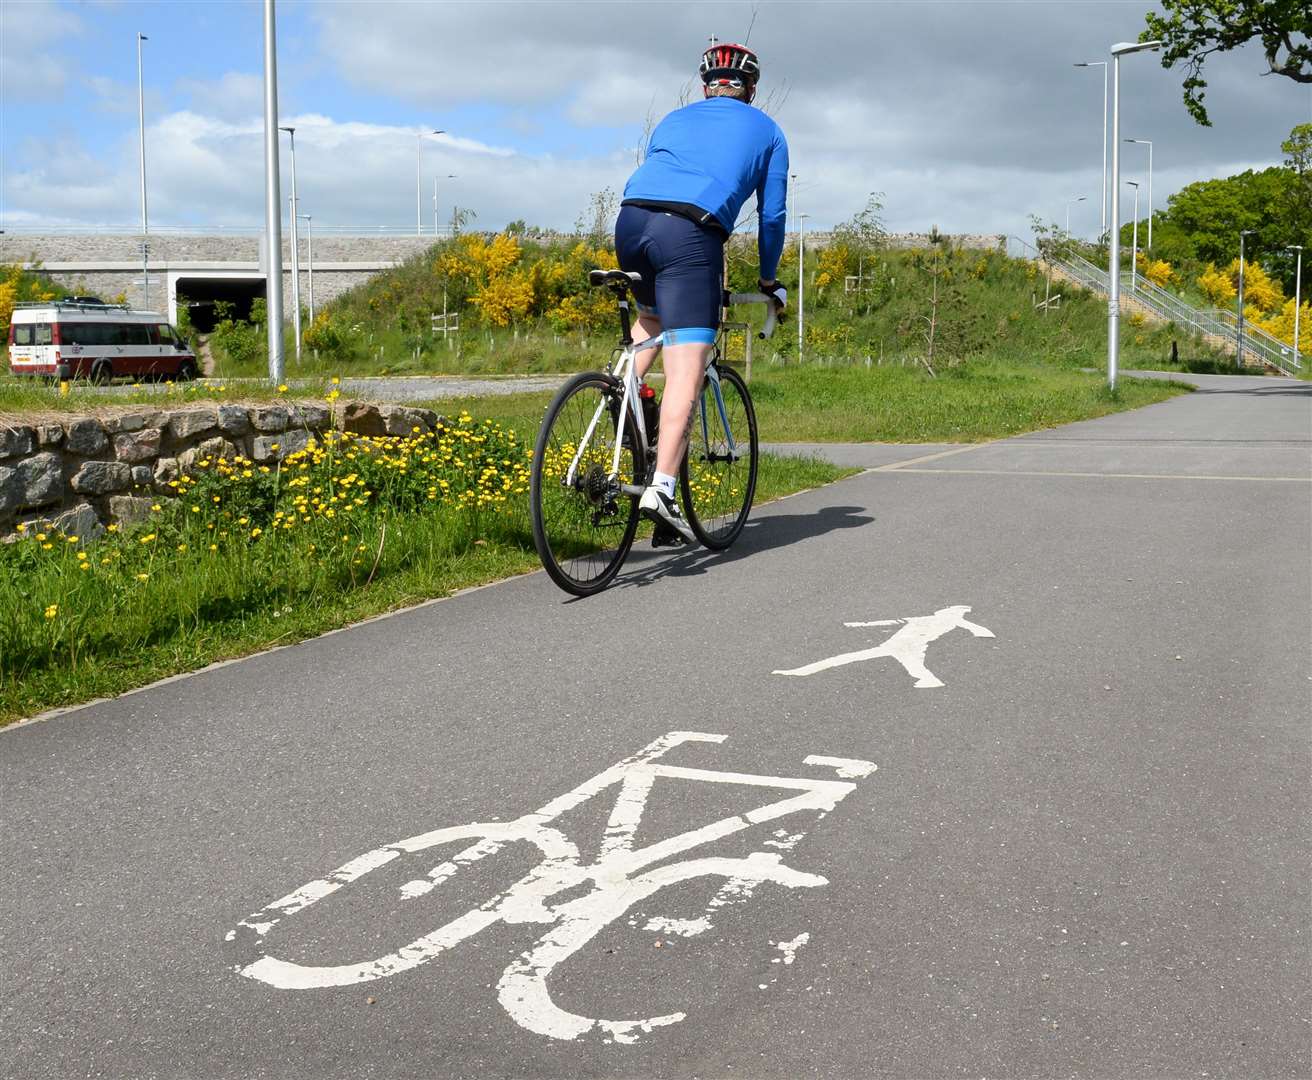 Active Travel the council plans to mark and improve cycle and walking routes to 'transform' Inverness city centre.